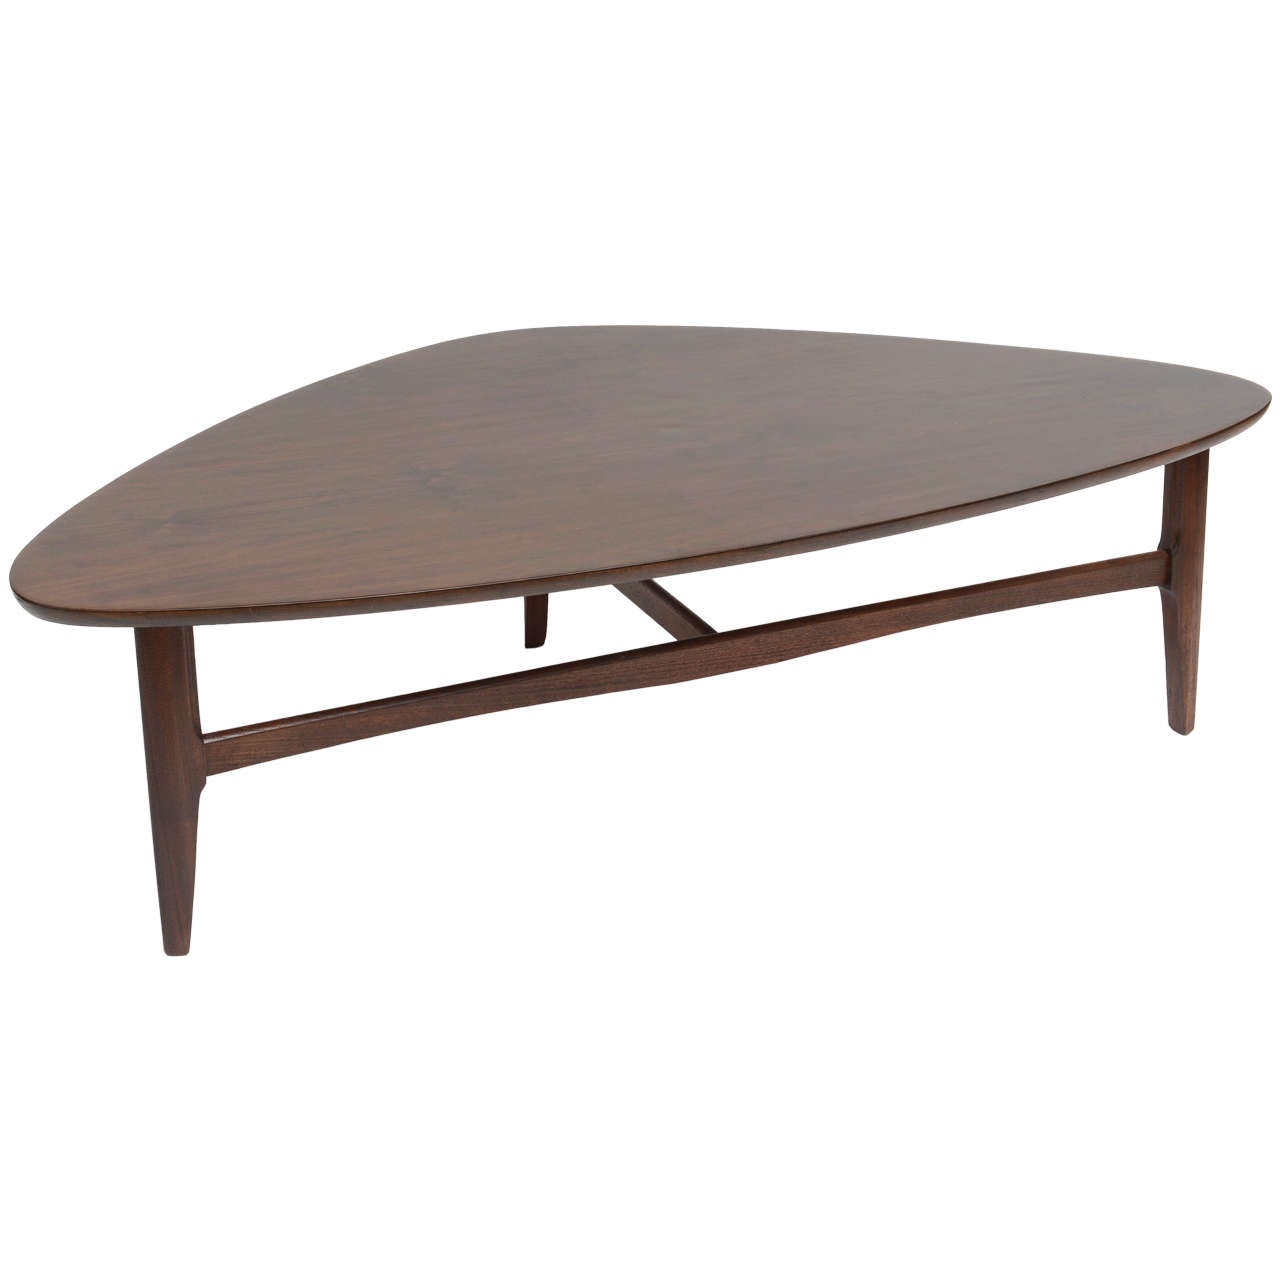 Pearsall-Style Kidney Bean Coffee Table